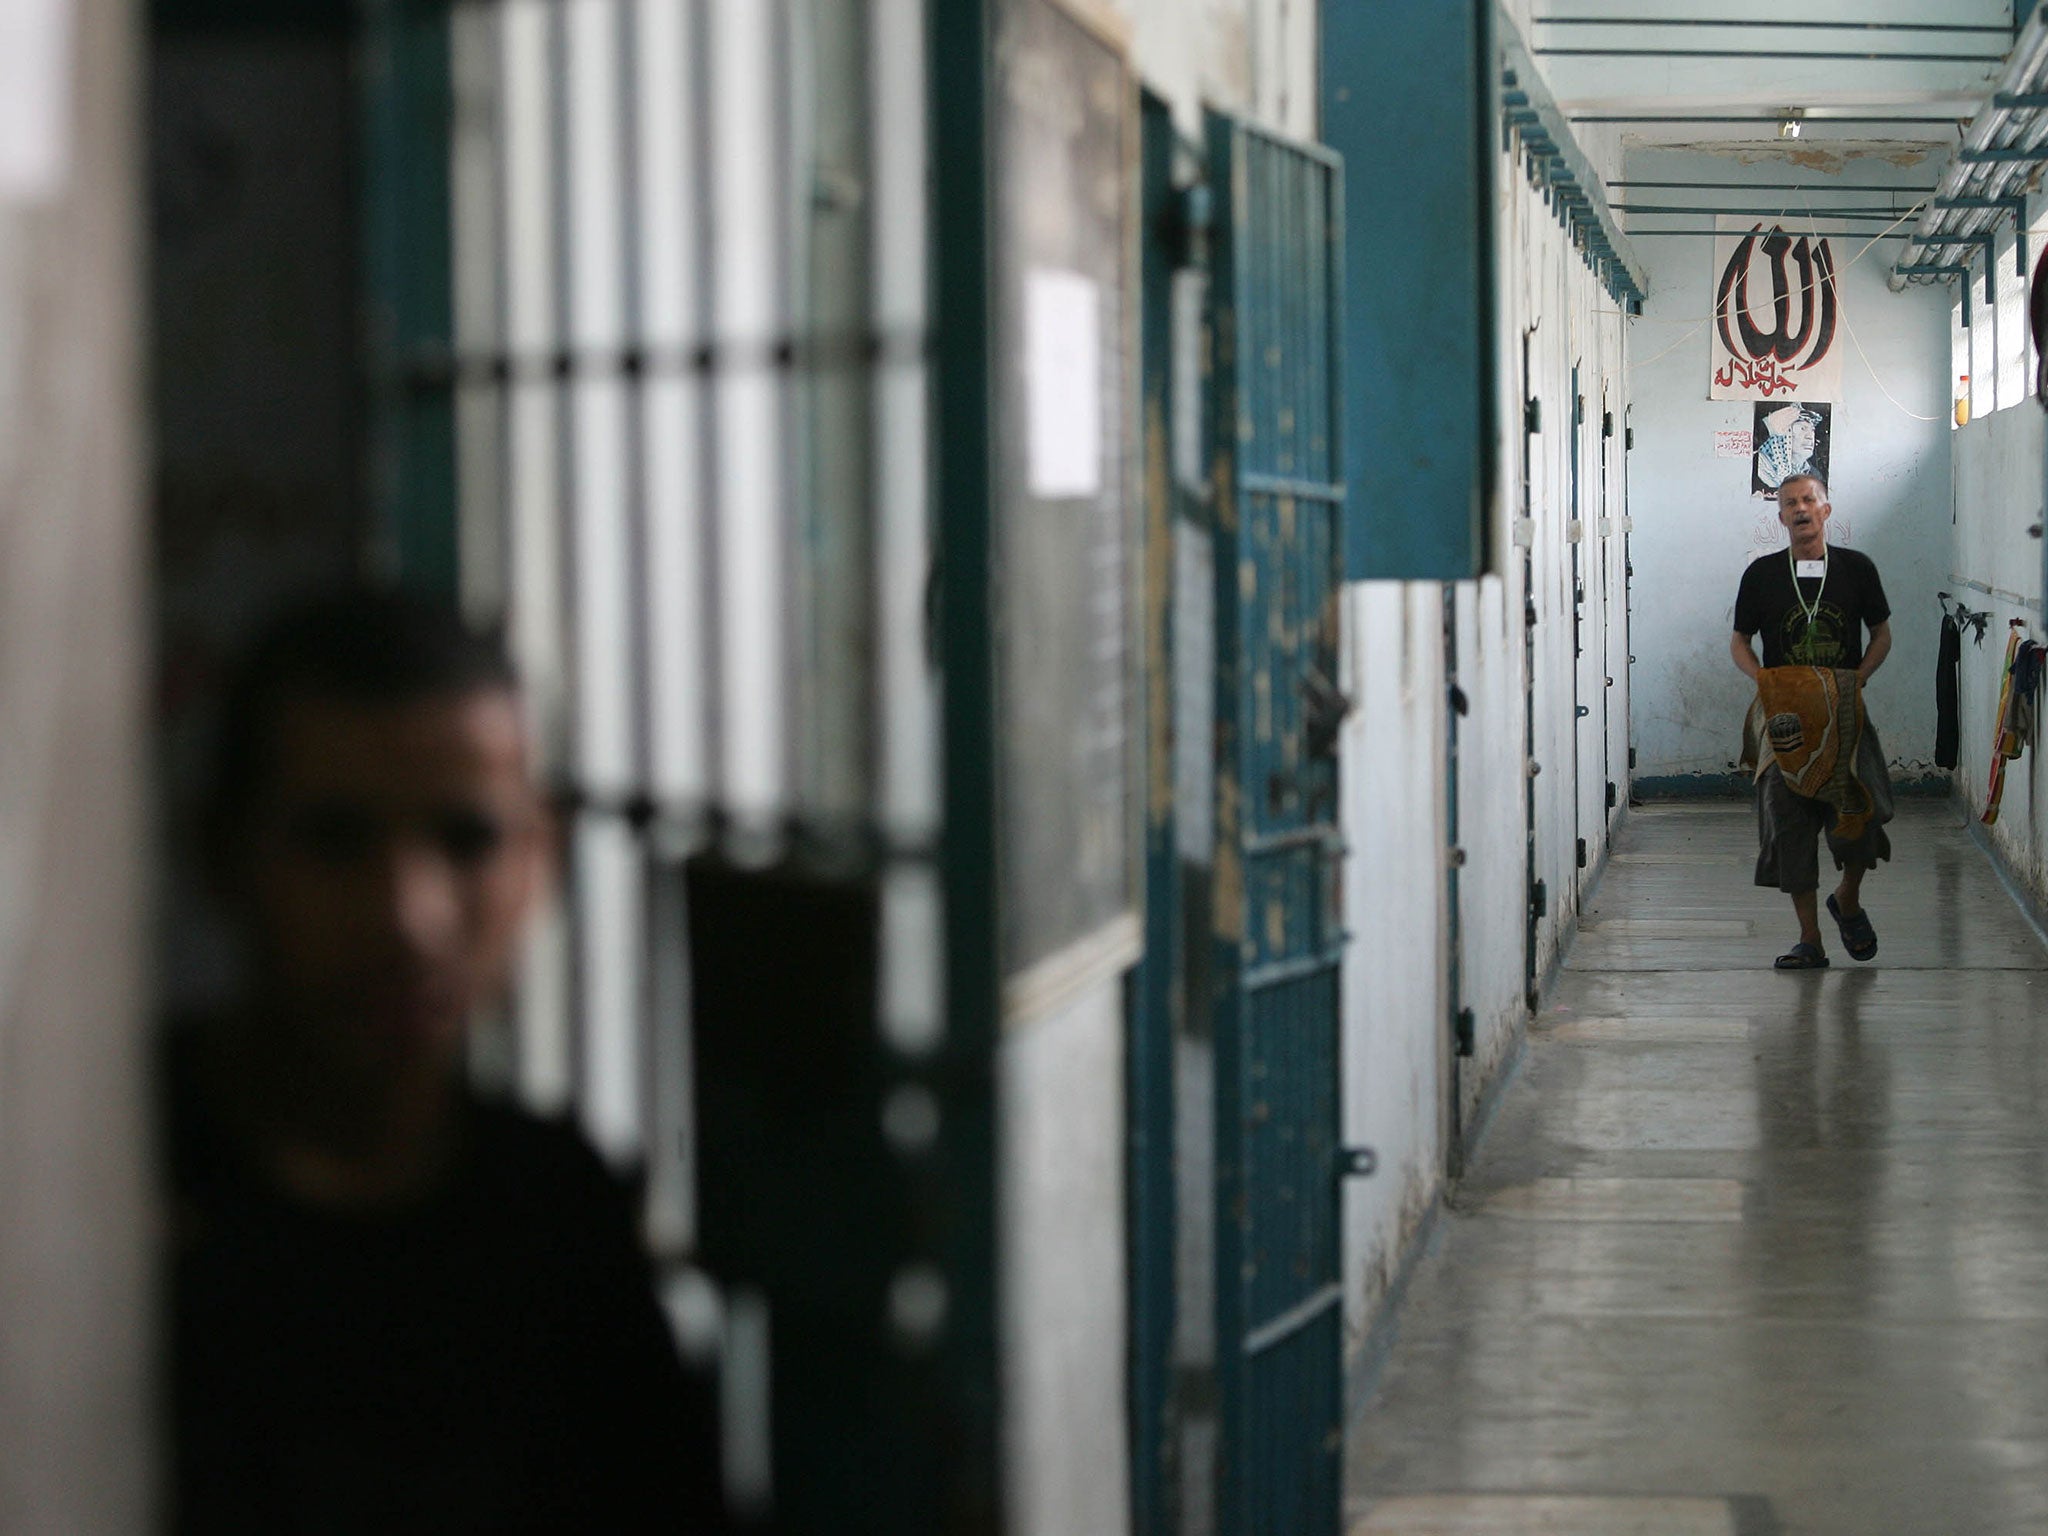 The prisoners were executed inside Gaza's central prison